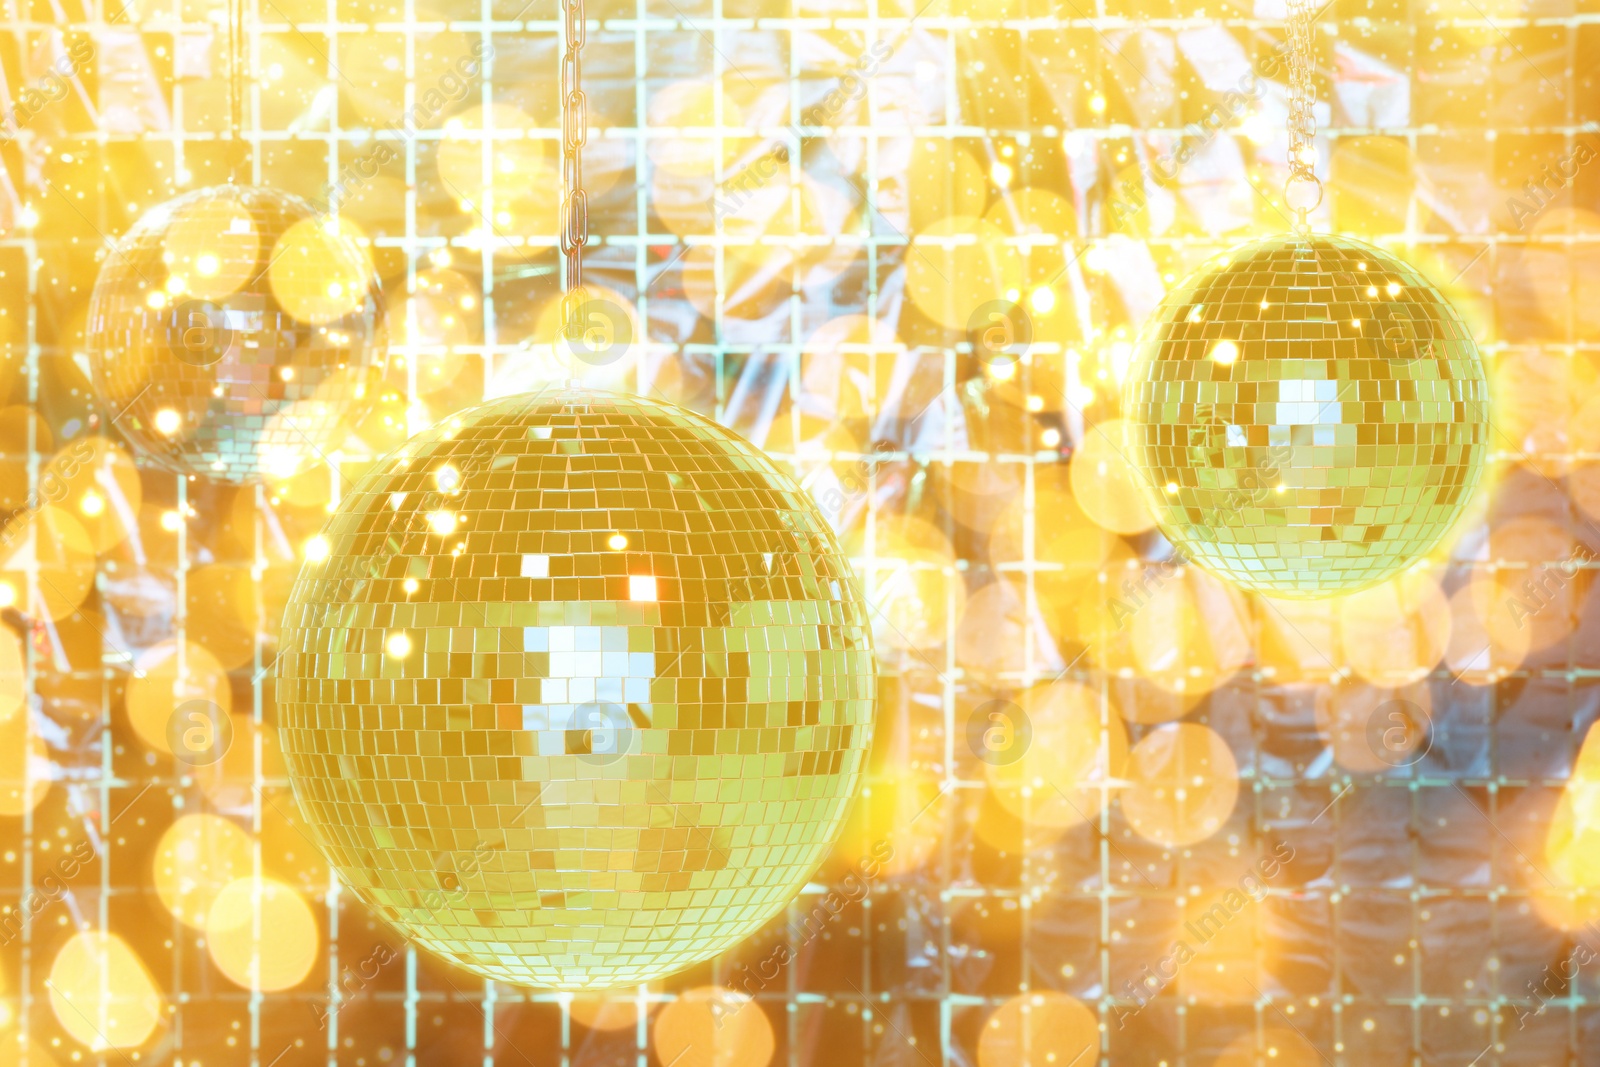 Image of Shiny disco balls against foil party curtain under golden lights, bokeh effect